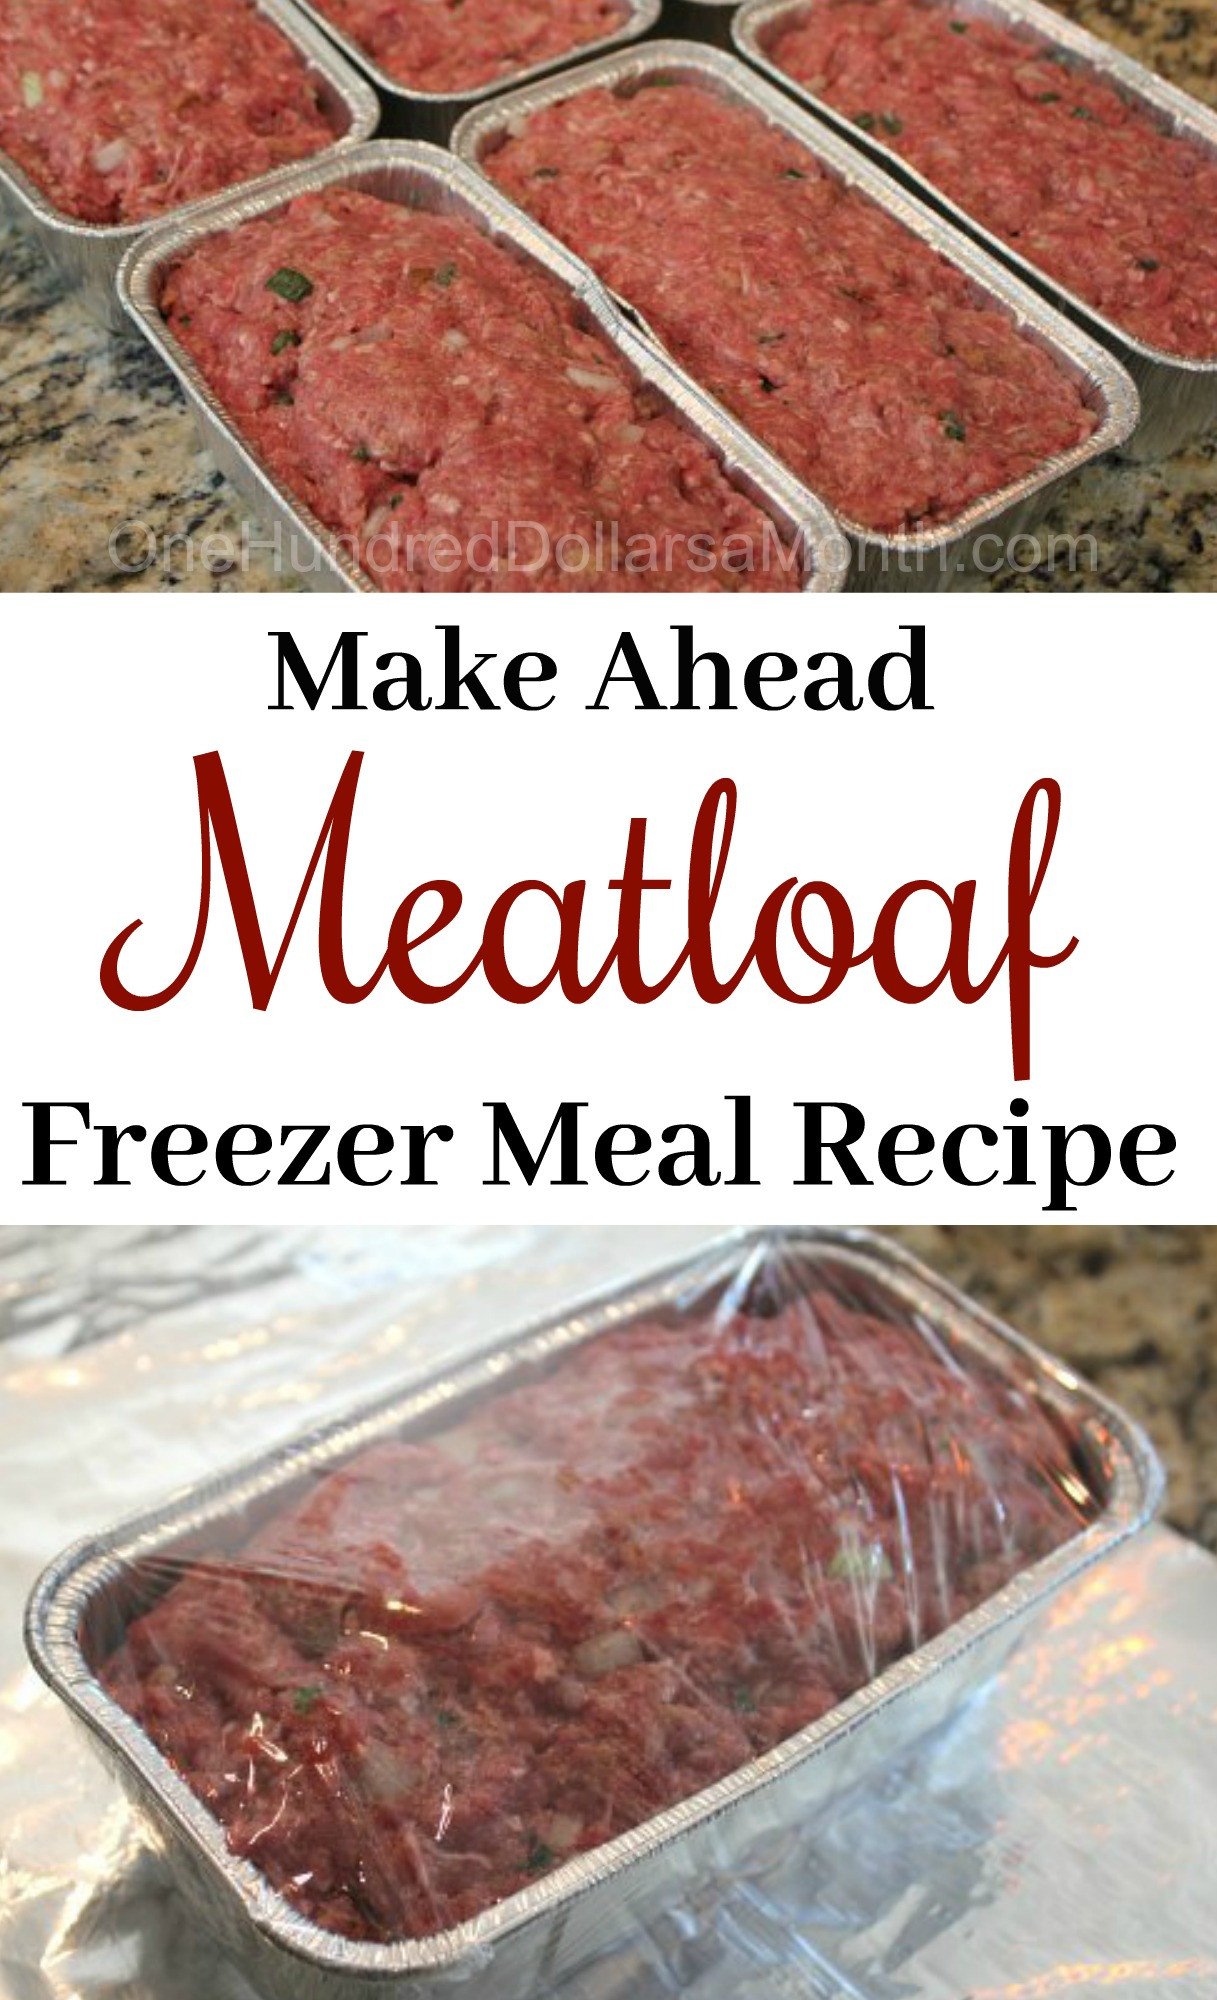 Make Ahead Dinner Recipes
 Easy Freezer Meals Simple Meat Loaf Recipe e Hundred